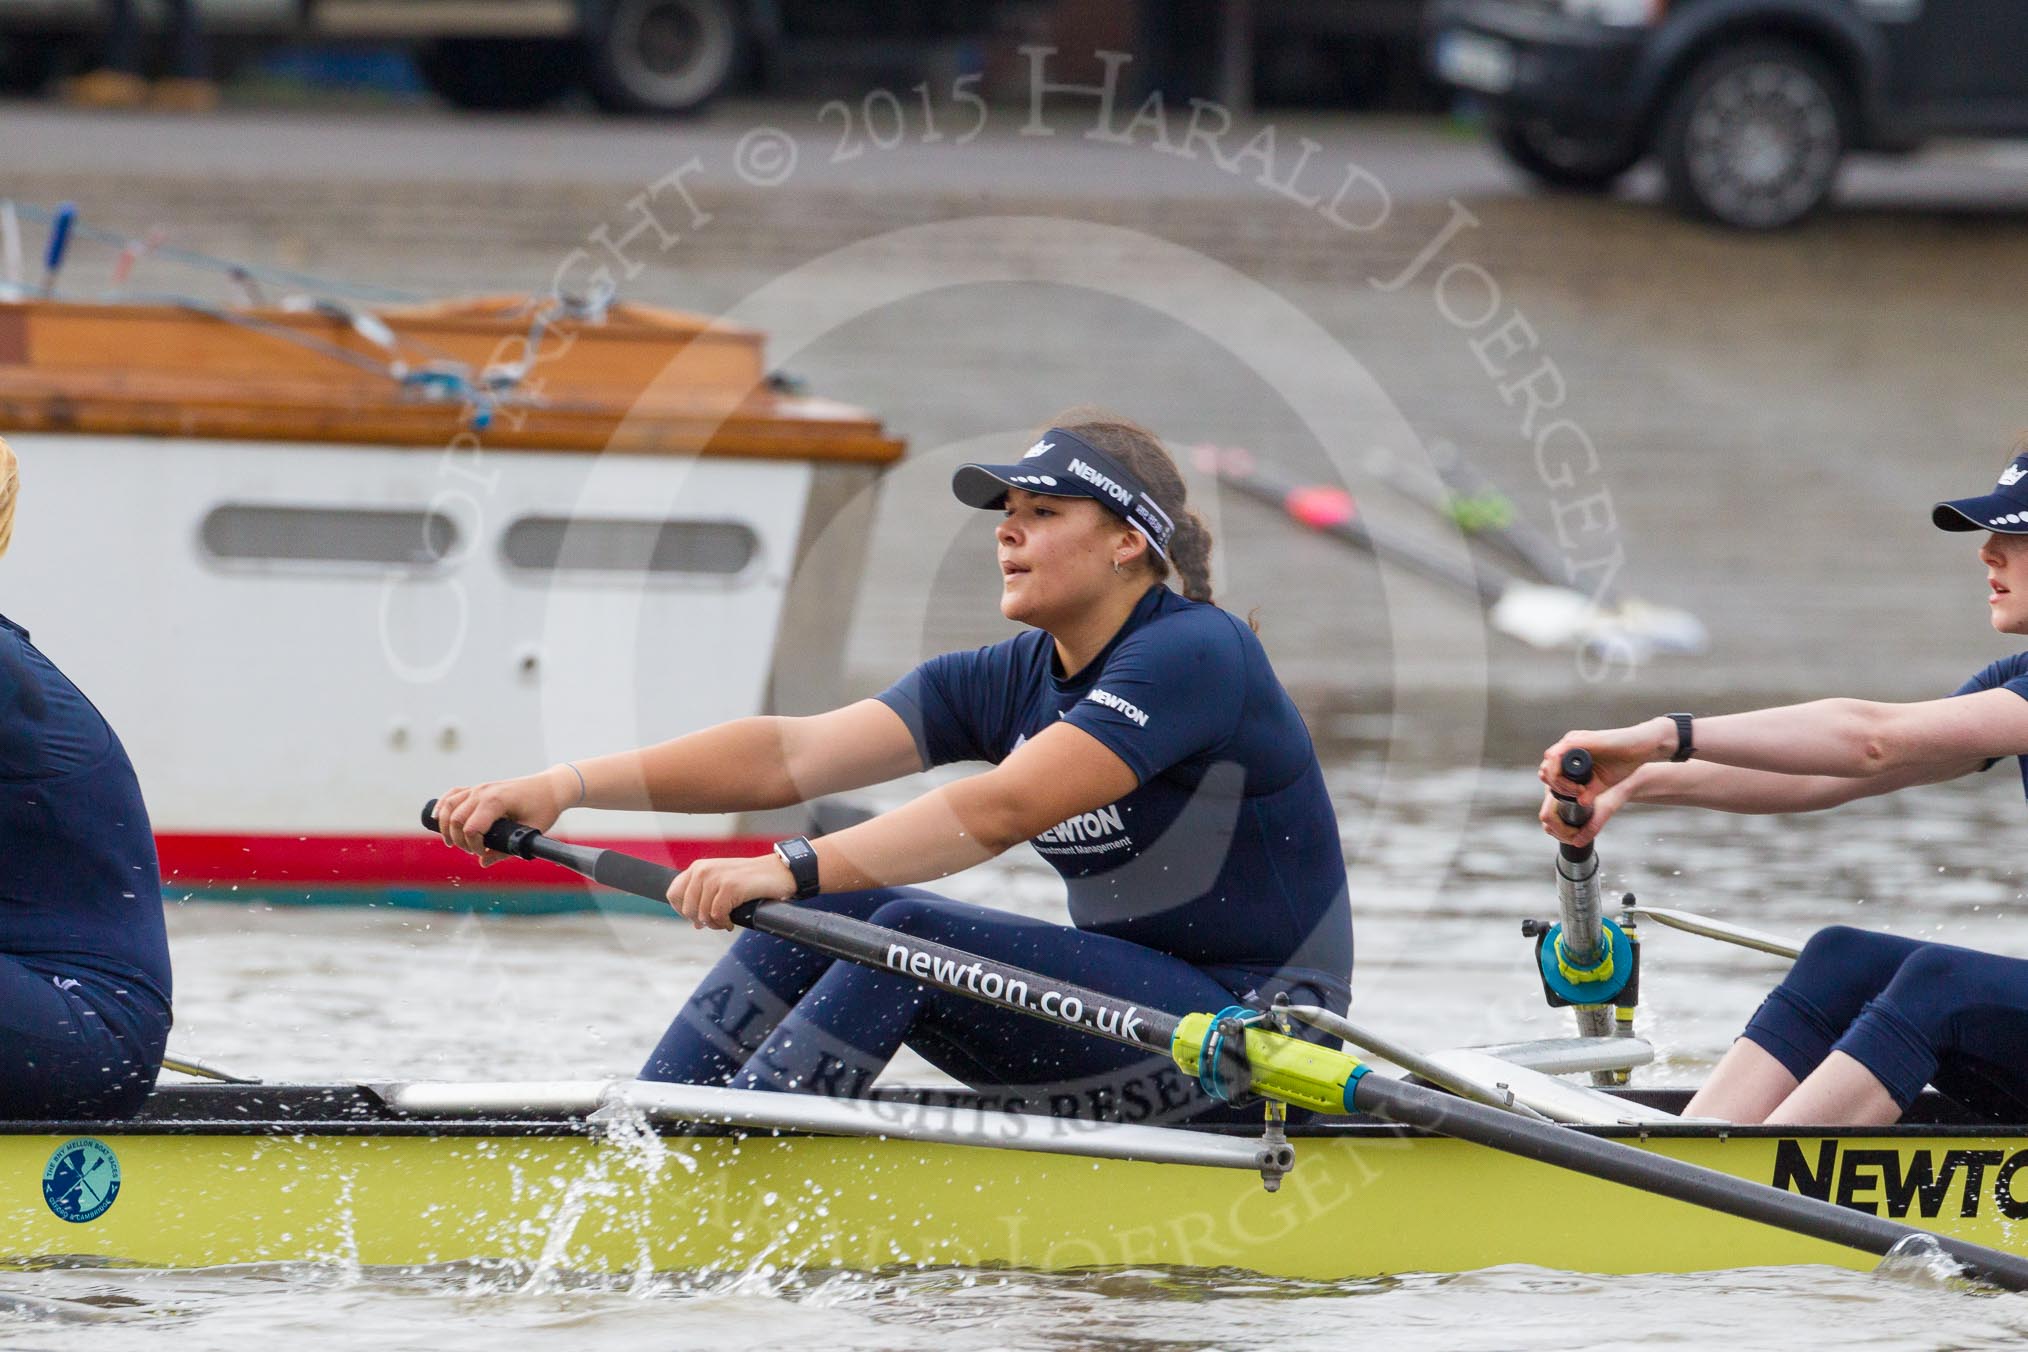 The Boat Race season 2016 - Women's Boat Race Trial Eights (OUWBC, Oxford): "Charybdis", here 3-Lara Pysden, 2-Christina Fleischer.
River Thames between Putney Bridge and Mortlake,
London SW15,

United Kingdom,
on 10 December 2015 at 12:19, image #156